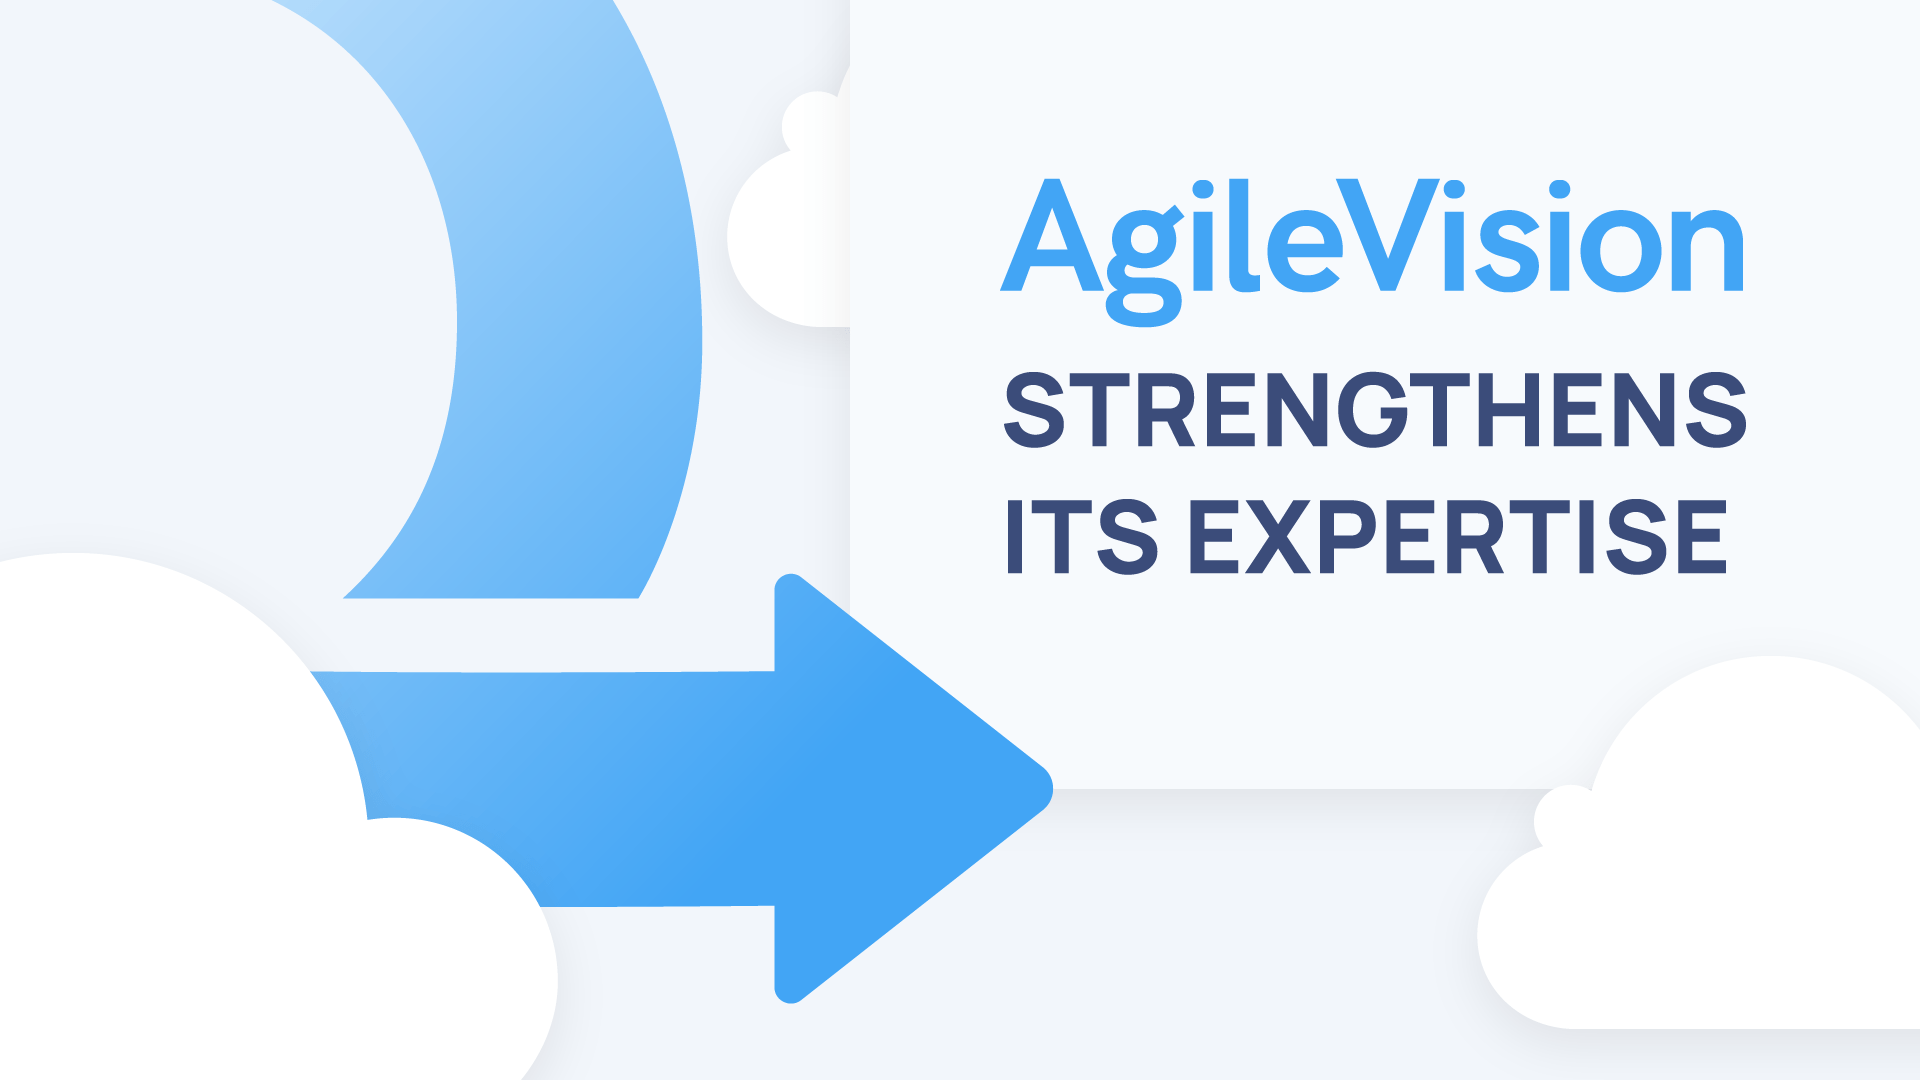 AgileVision strengthens its expertise as the AWS Consulting Partner